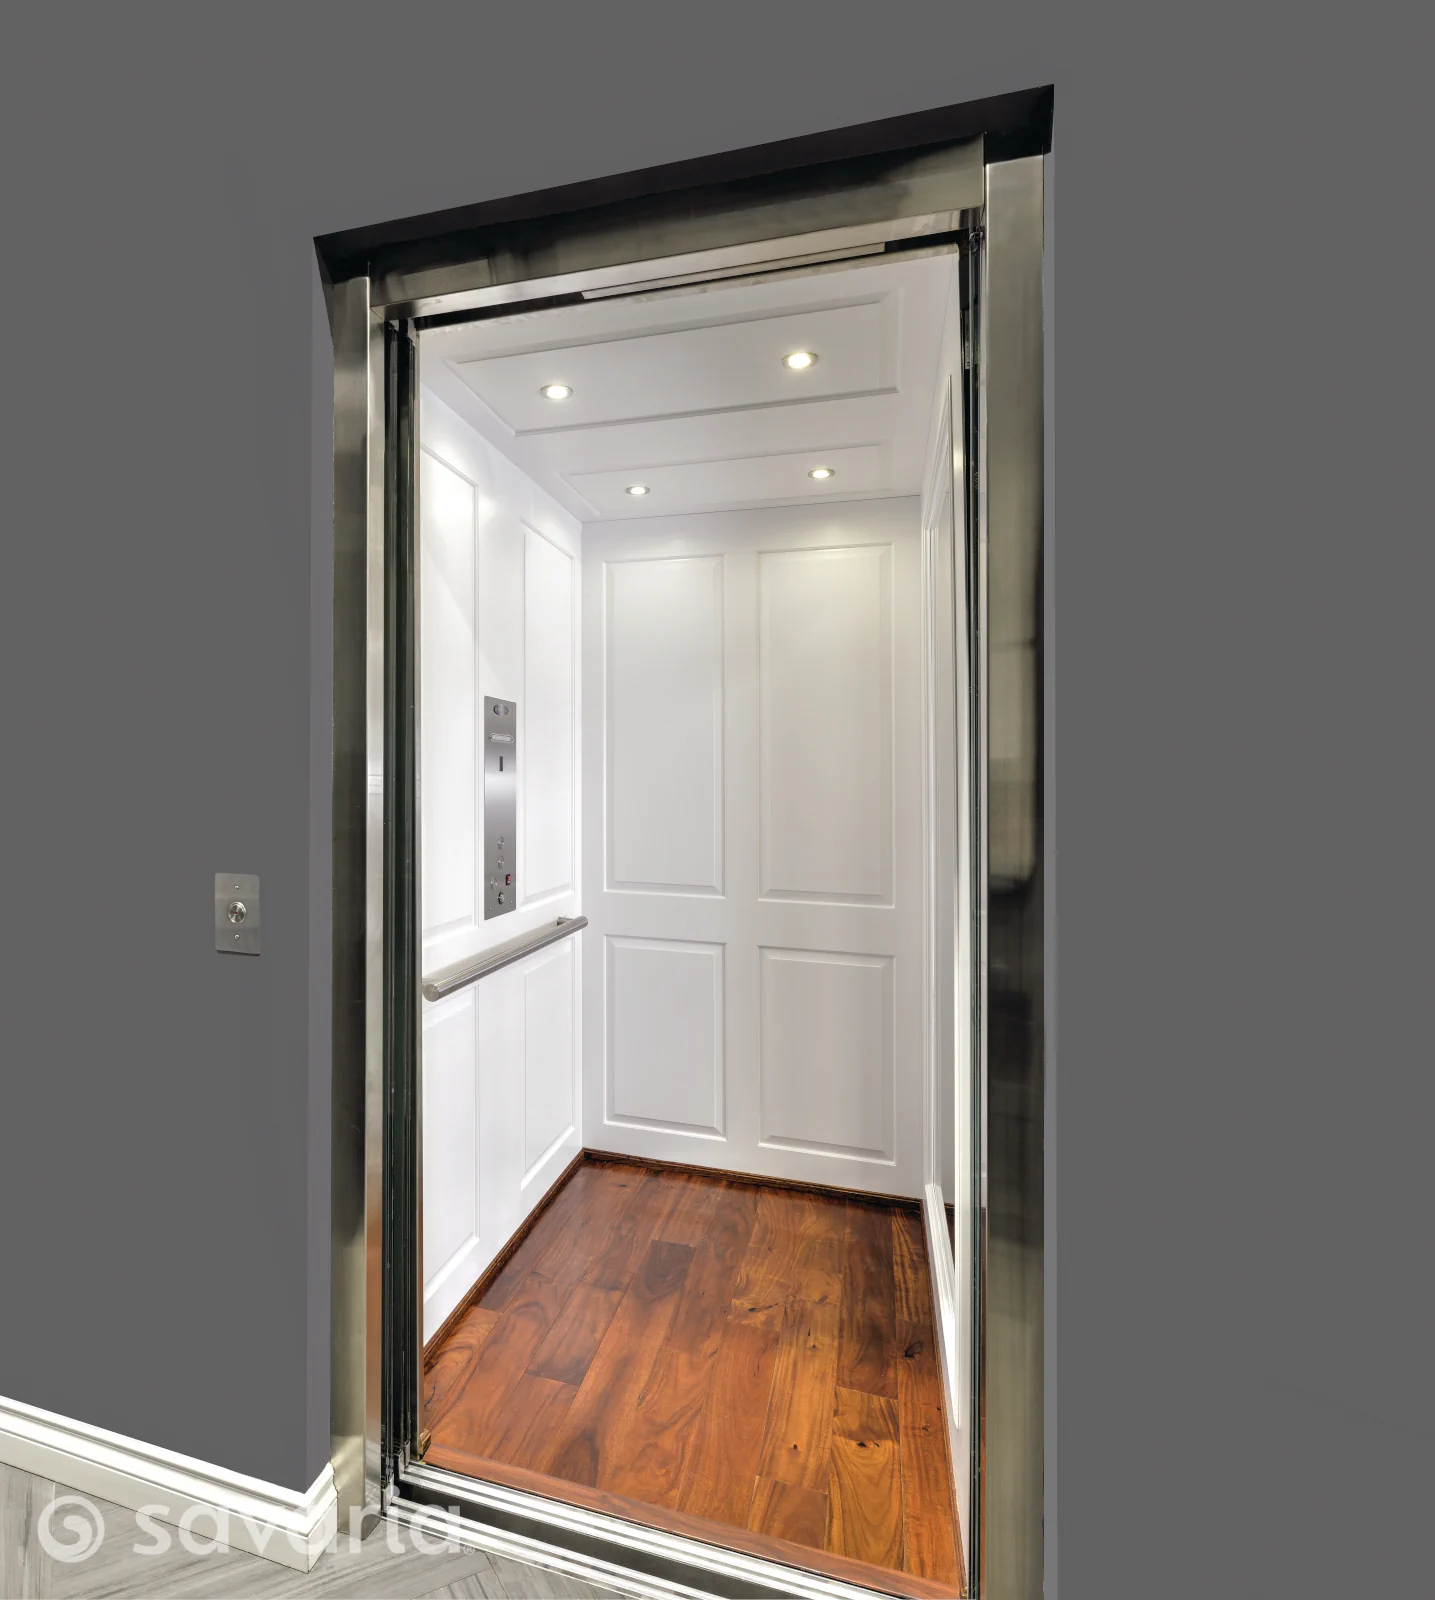 https://www.mobility123.com/wp-content/uploads/2023/04/Savaria-home-elevator-routed-white-MDRF.webp